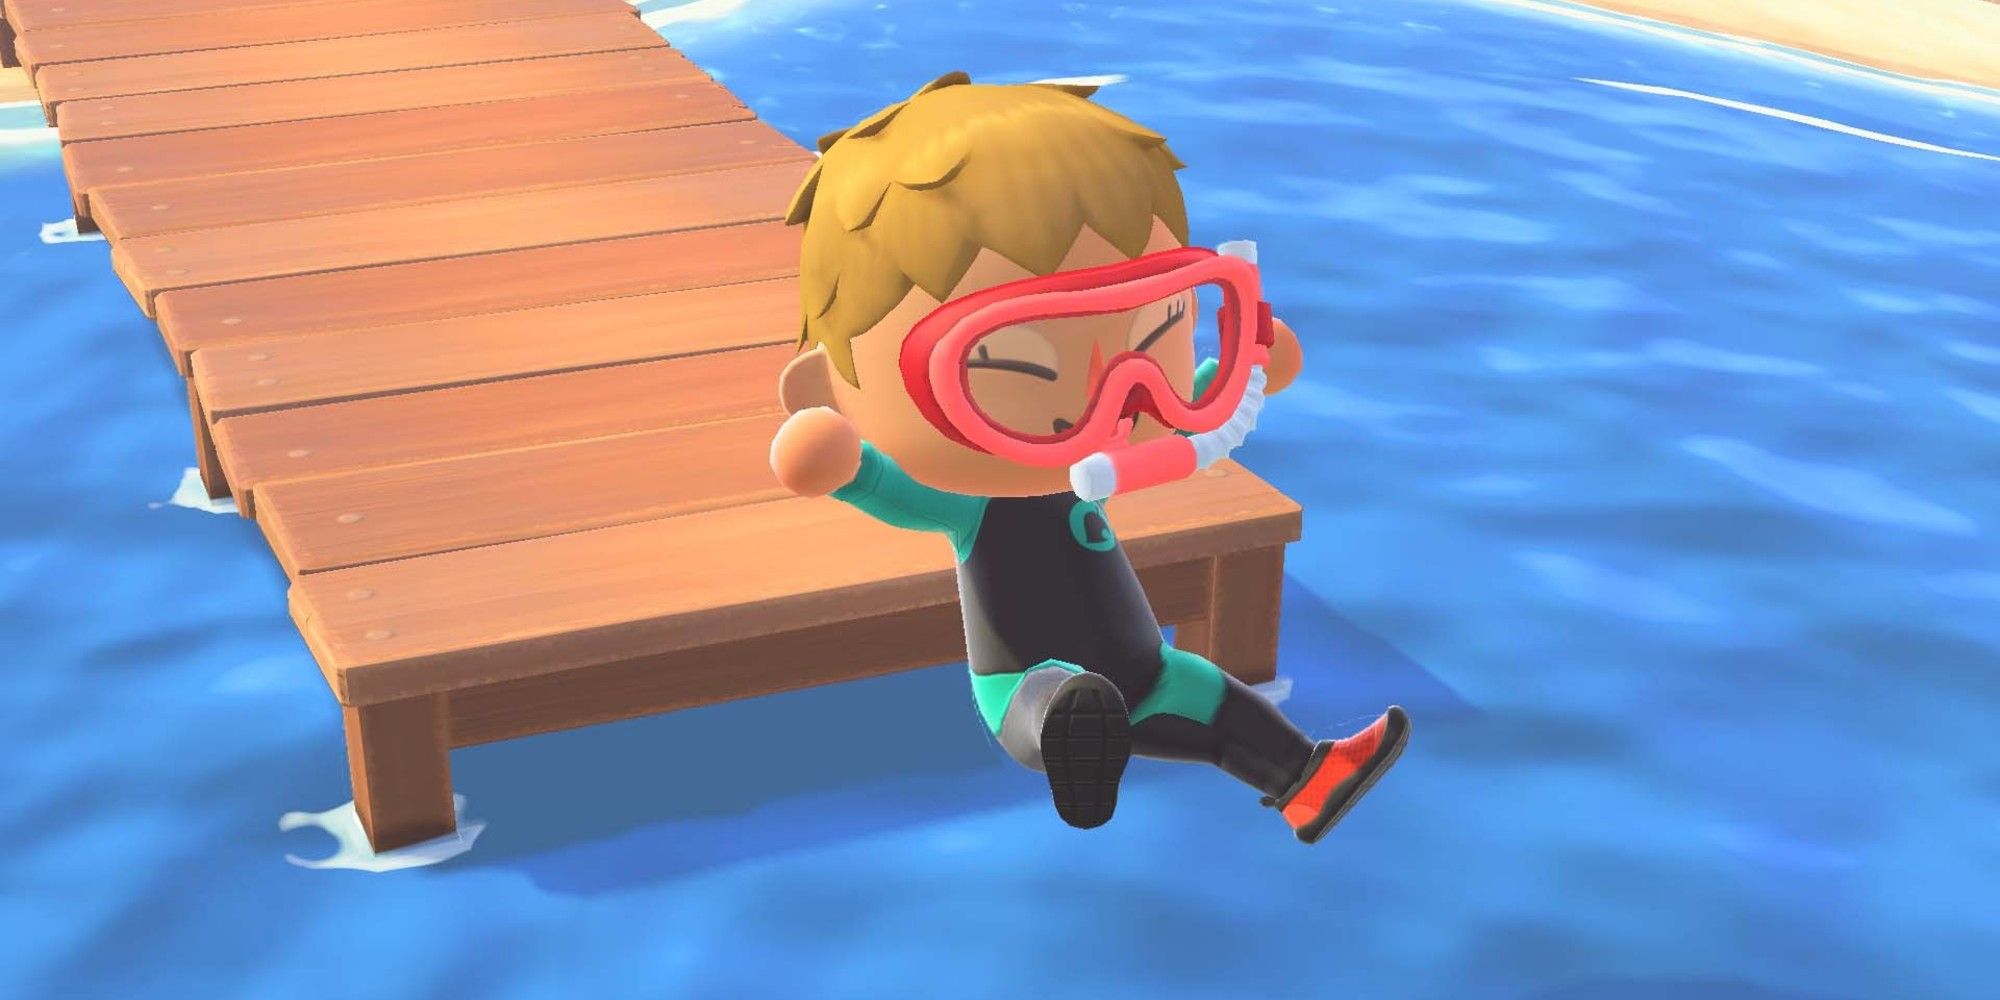 A player in a snorkel and wetsuit dives off the pier into the ocean in Animal Crossing: New Horizons